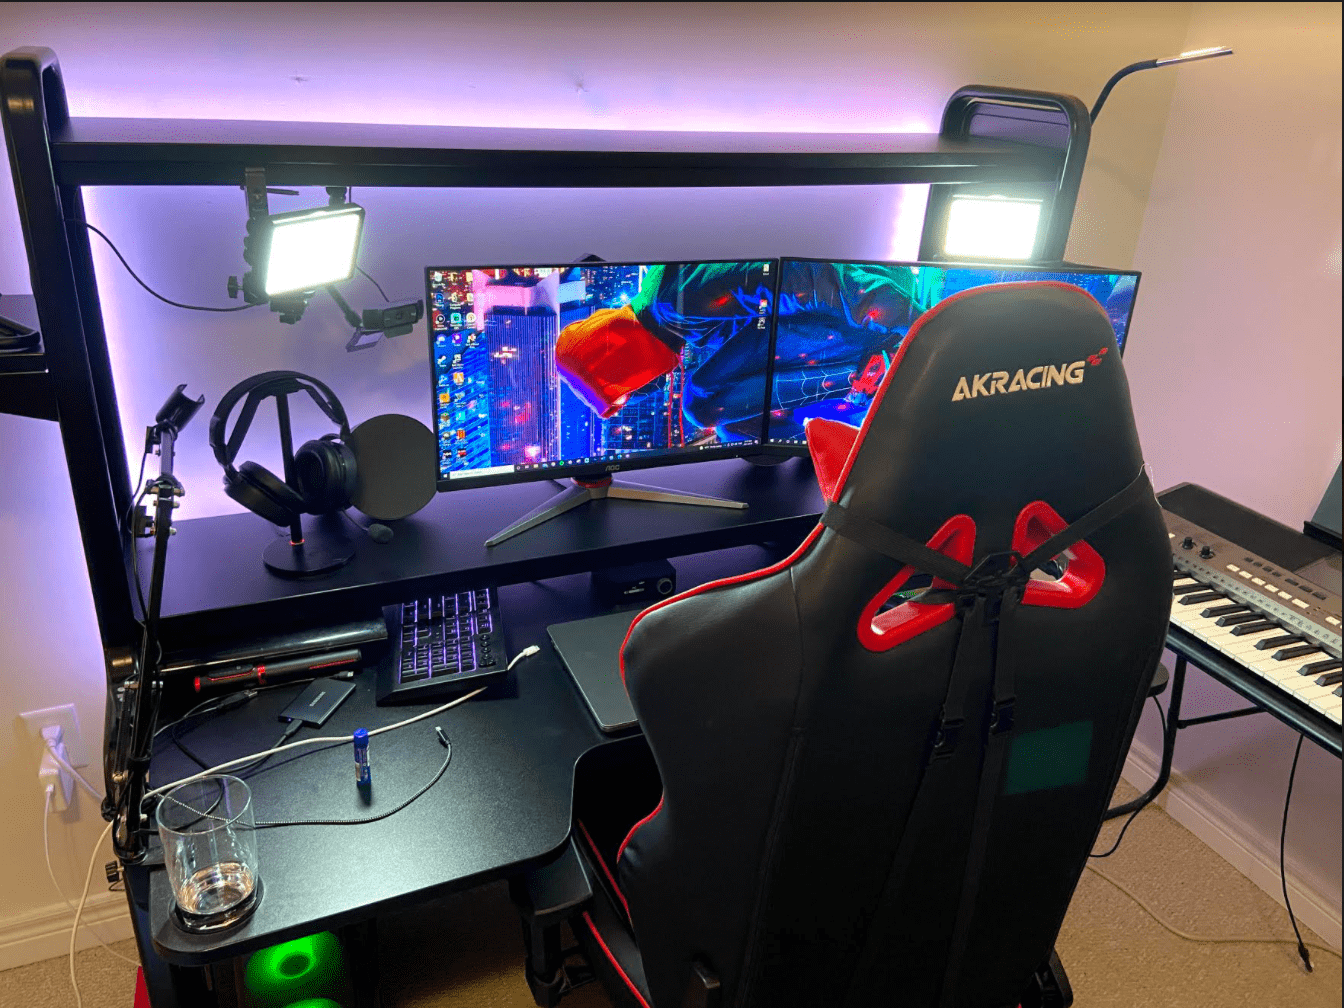 Photograph shows Dimuccio’s gaming and editing set-up in his home office. Two computer monitors sit on his black desk, along with lights, headphones, and a microphone. He has a gaming office chair.